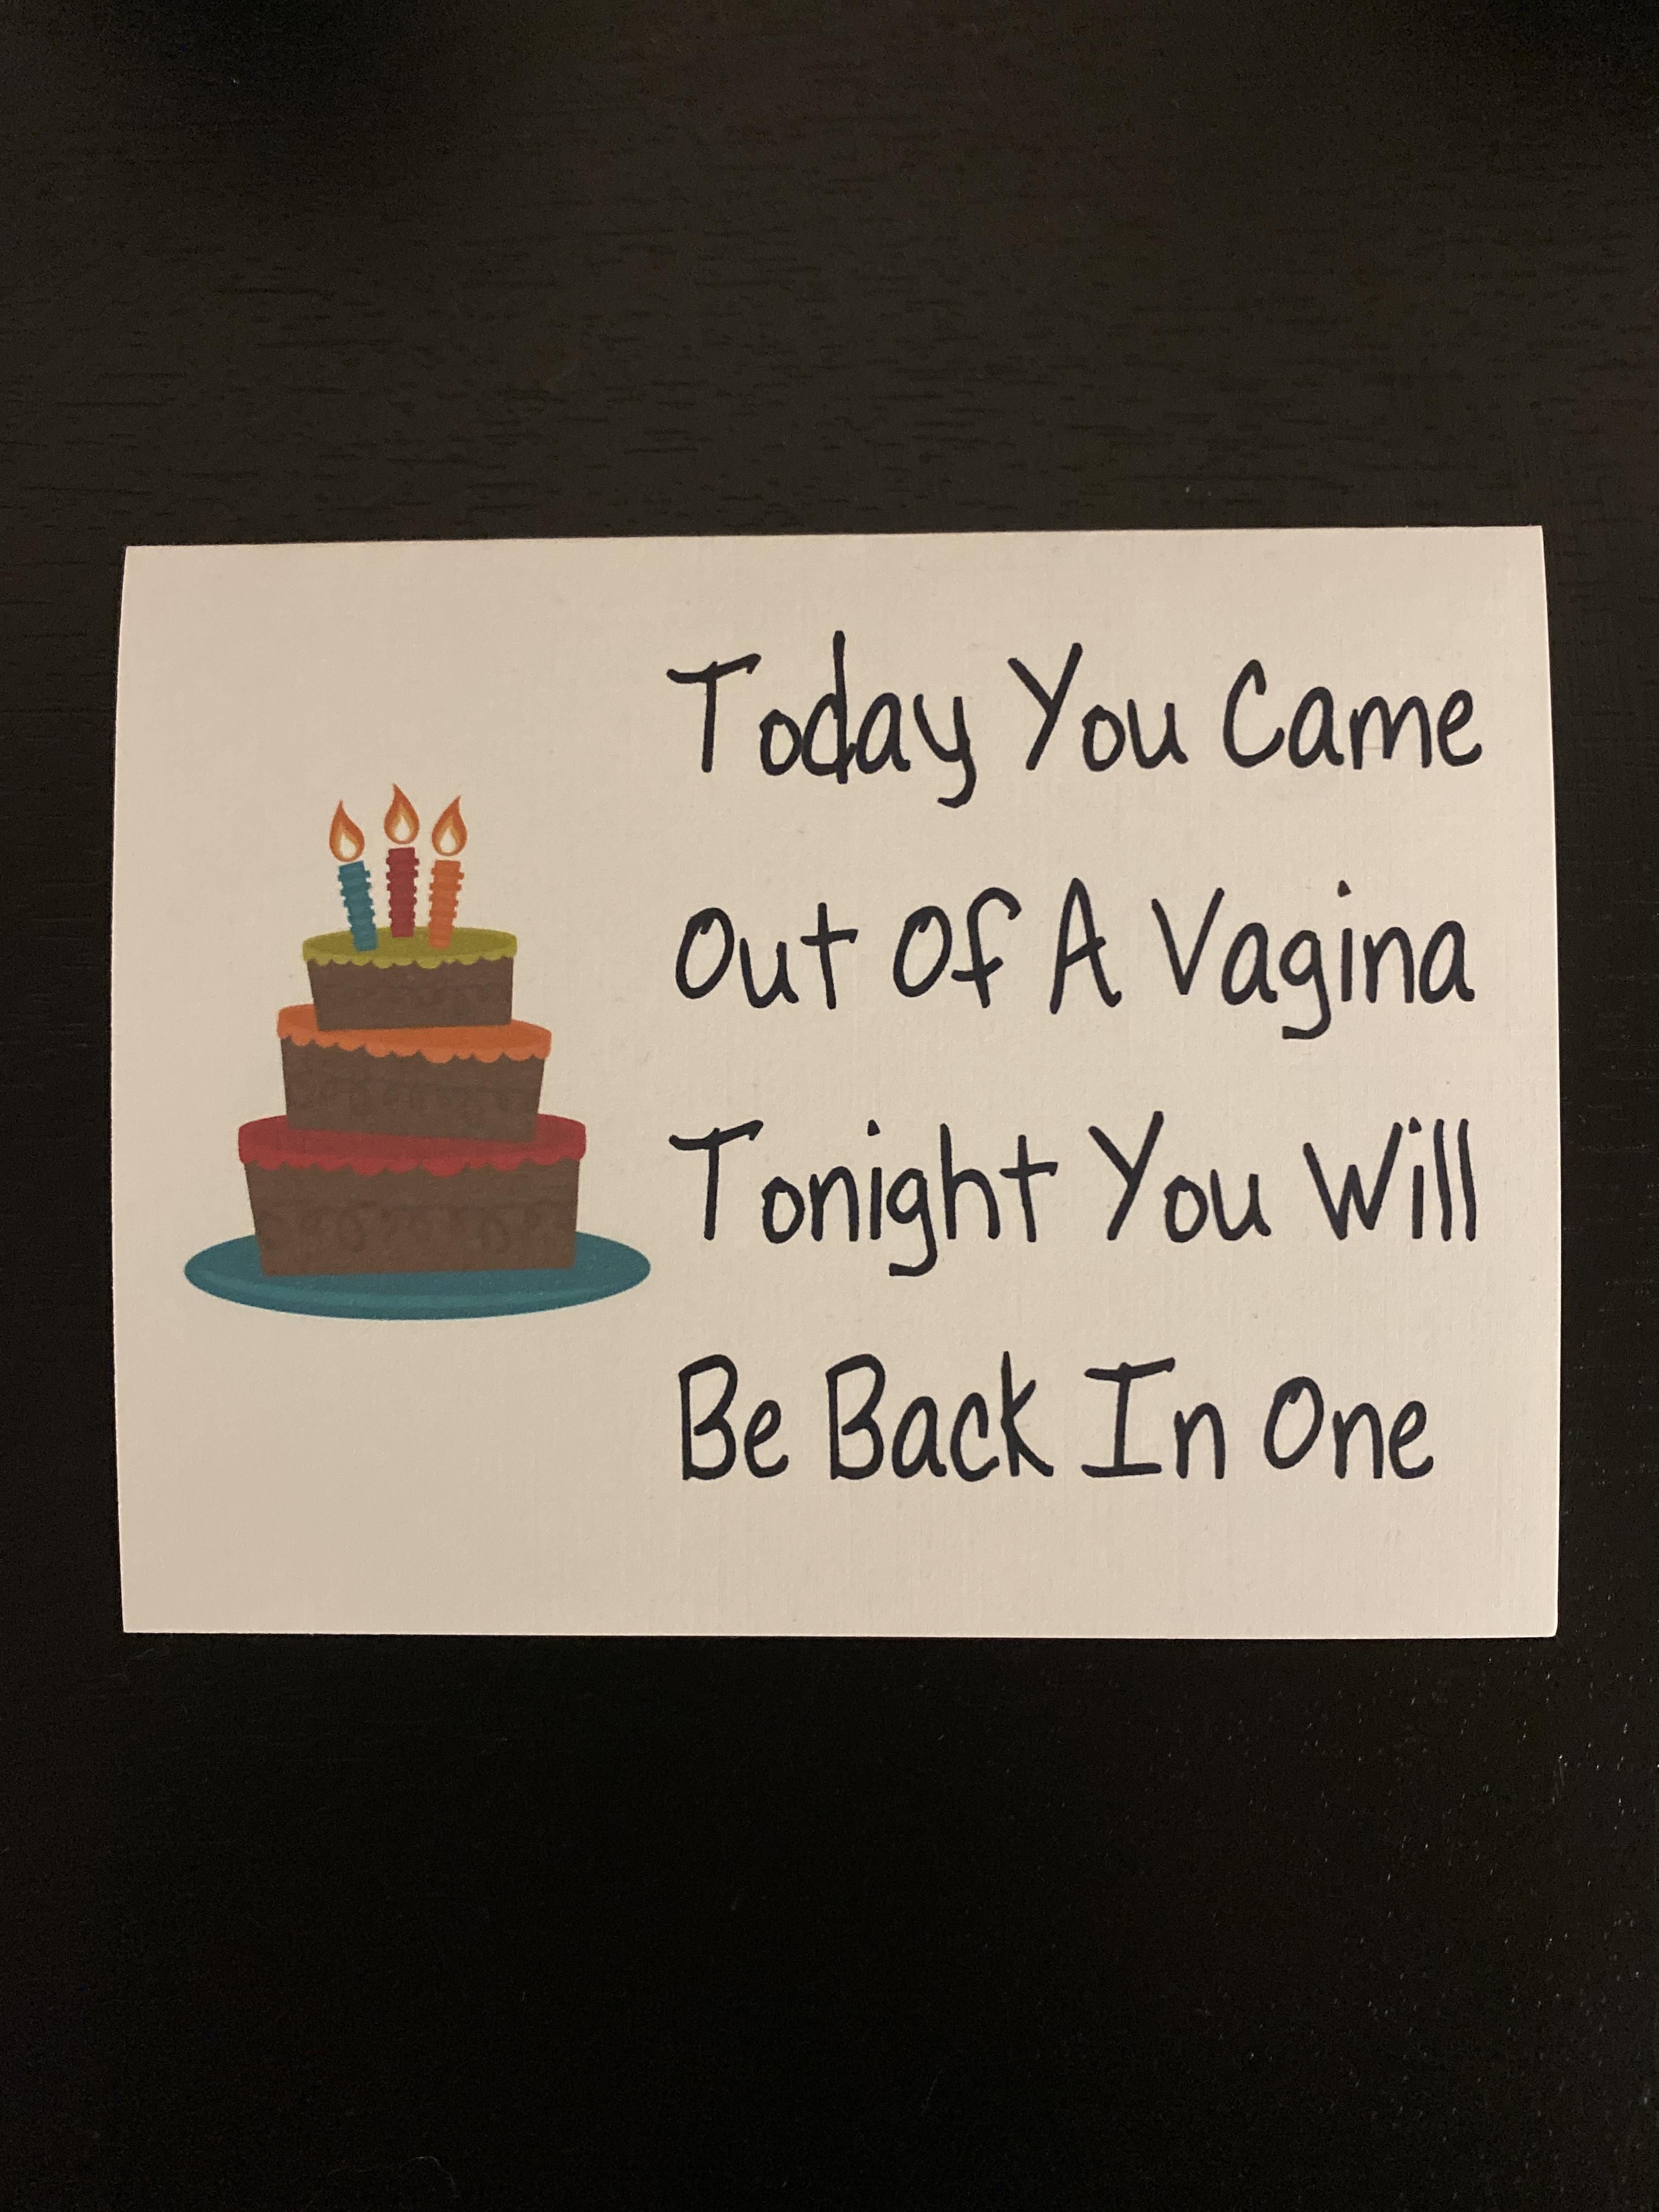 I, as well, received an interesting bday card from my girlfriend.